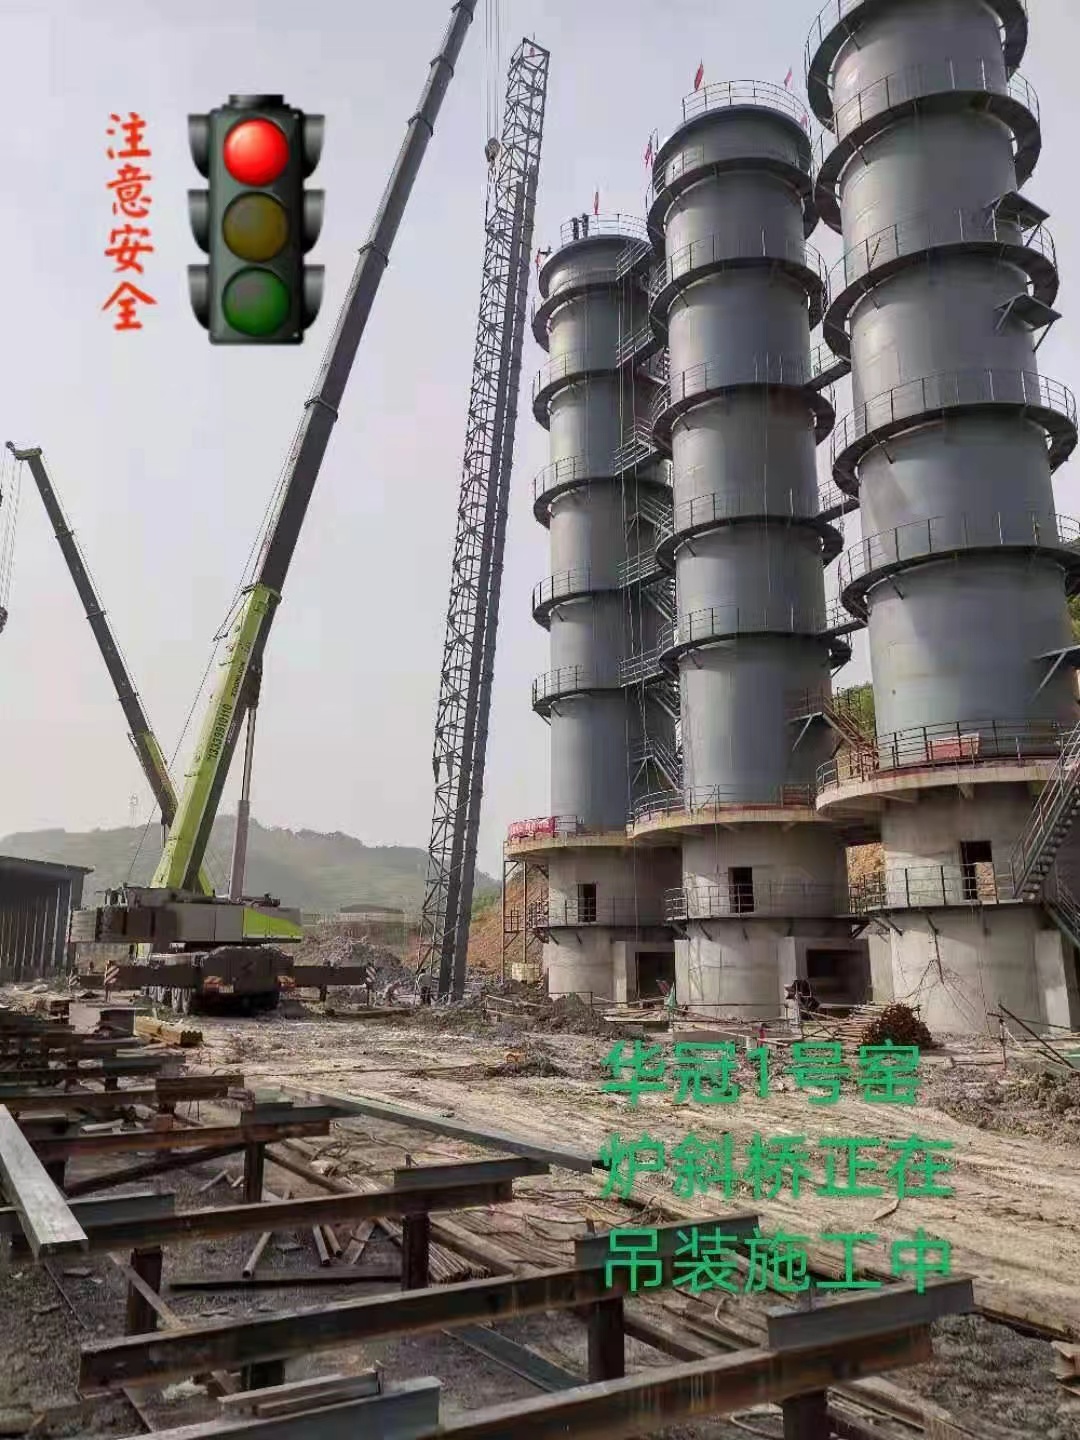 Hubei Fengyuan Calcium Industry Technology Co., Ltd. lime shaft kiln project site